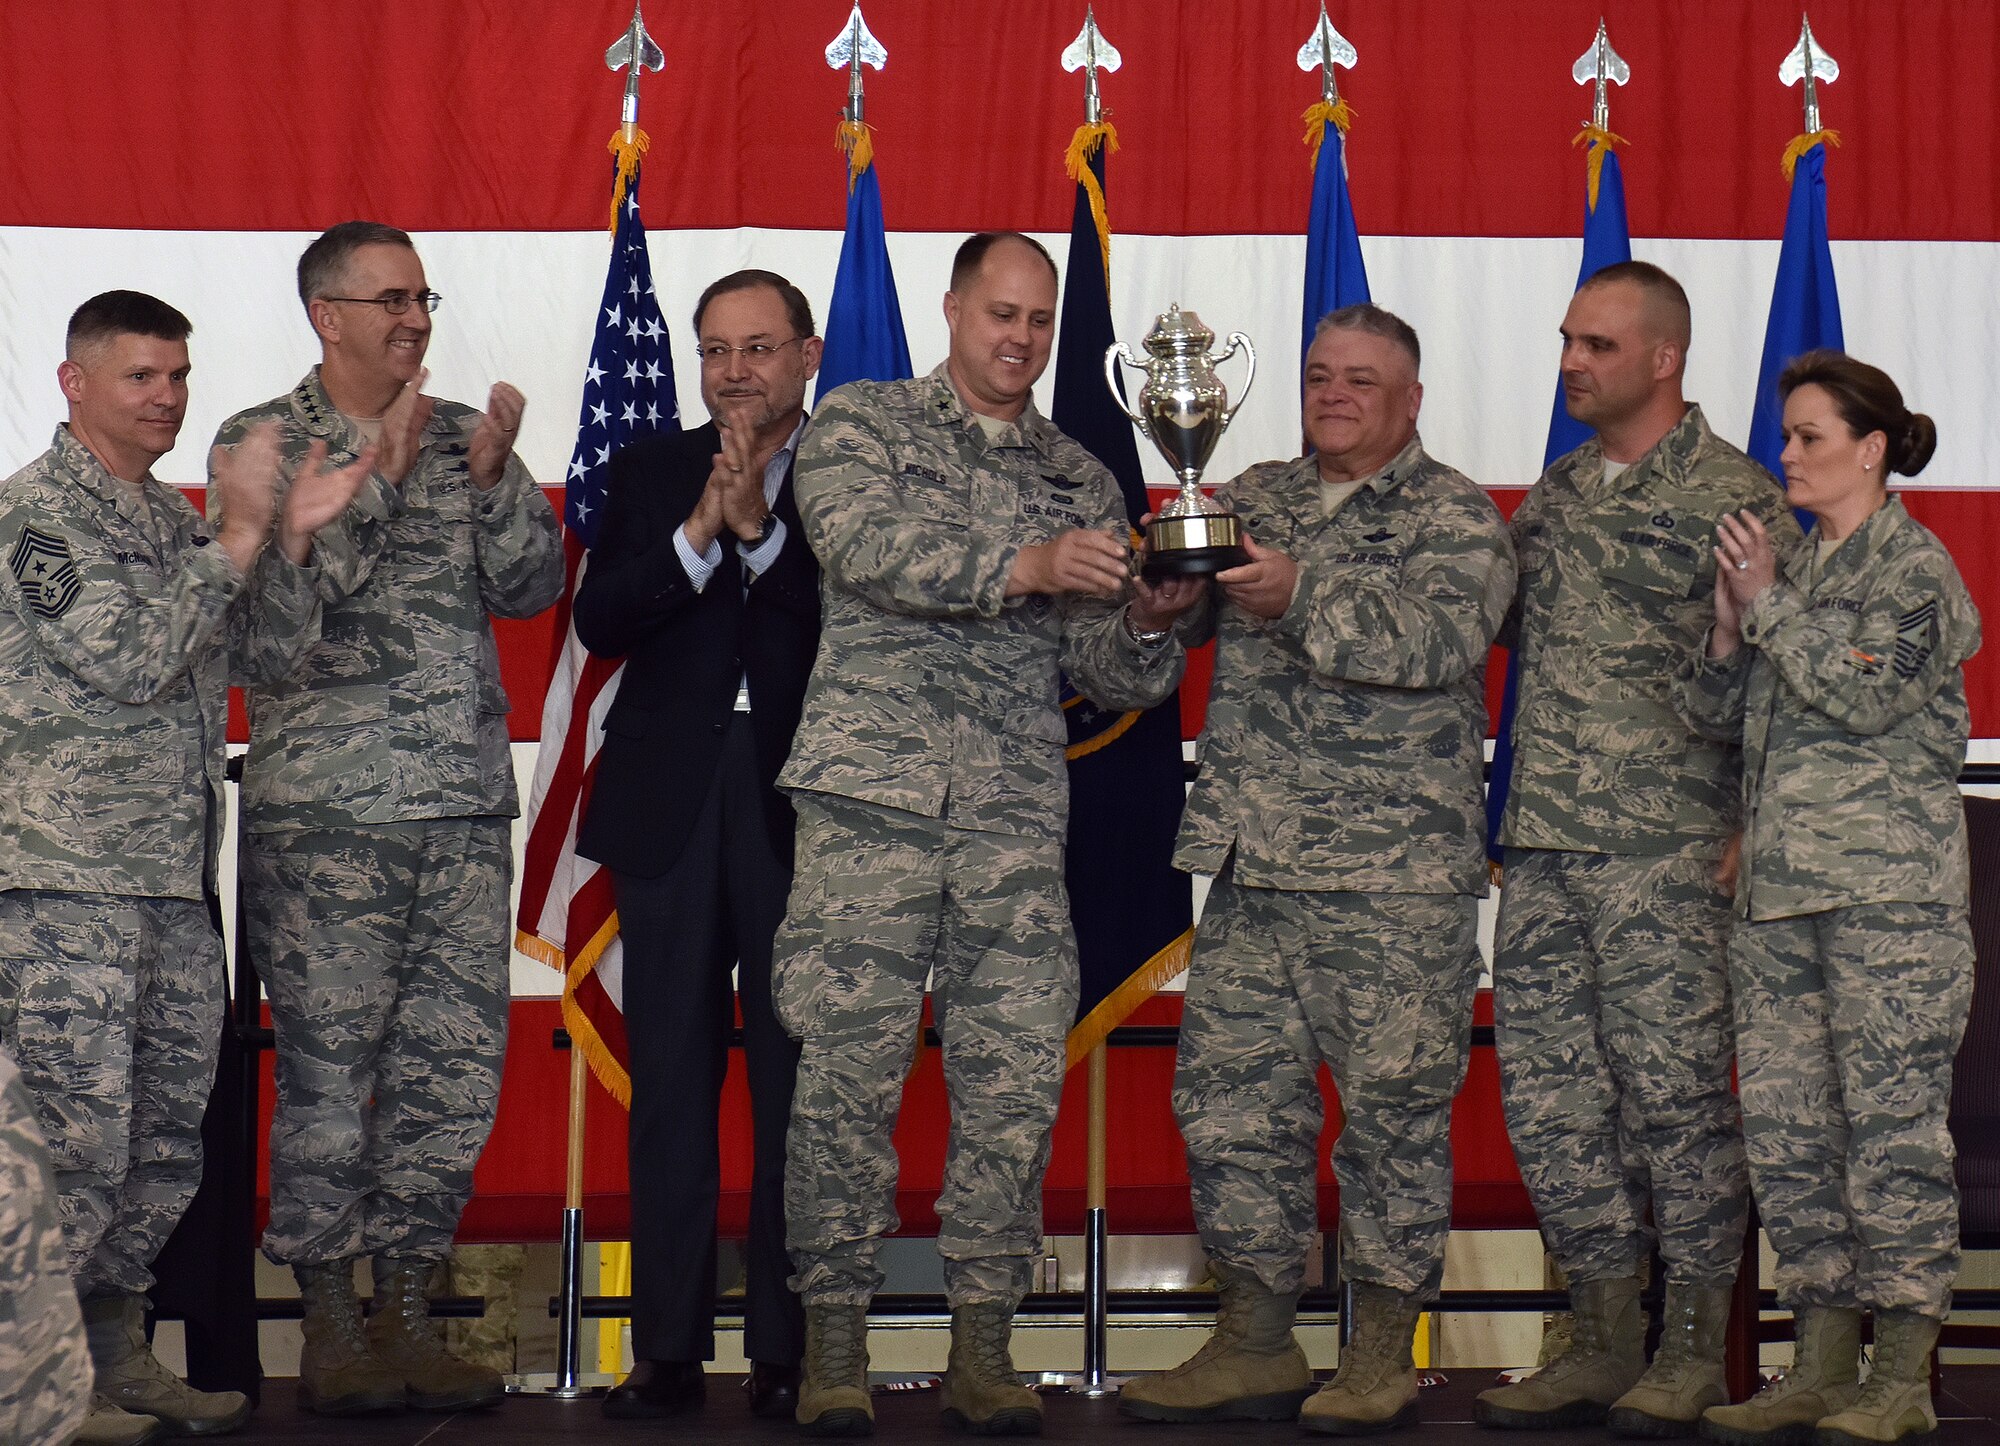 U.S. Air Force Brig. Gen. John Nichols, the 509th Bomb Wing commander, center left, and Col. Ken Eaves, the 131st Bomb Wing commander, display the Omaha Trophy at Whiteman Air Force Base, Mo., May 8, 2018. The award was awarded to Team Whiteman by U.S. Strategic Command and the Strategic Command Council for executing the best Strategic Bomber Operations of 2017. (U.S. Air Force photos by Senior Airman Jovan Banks)